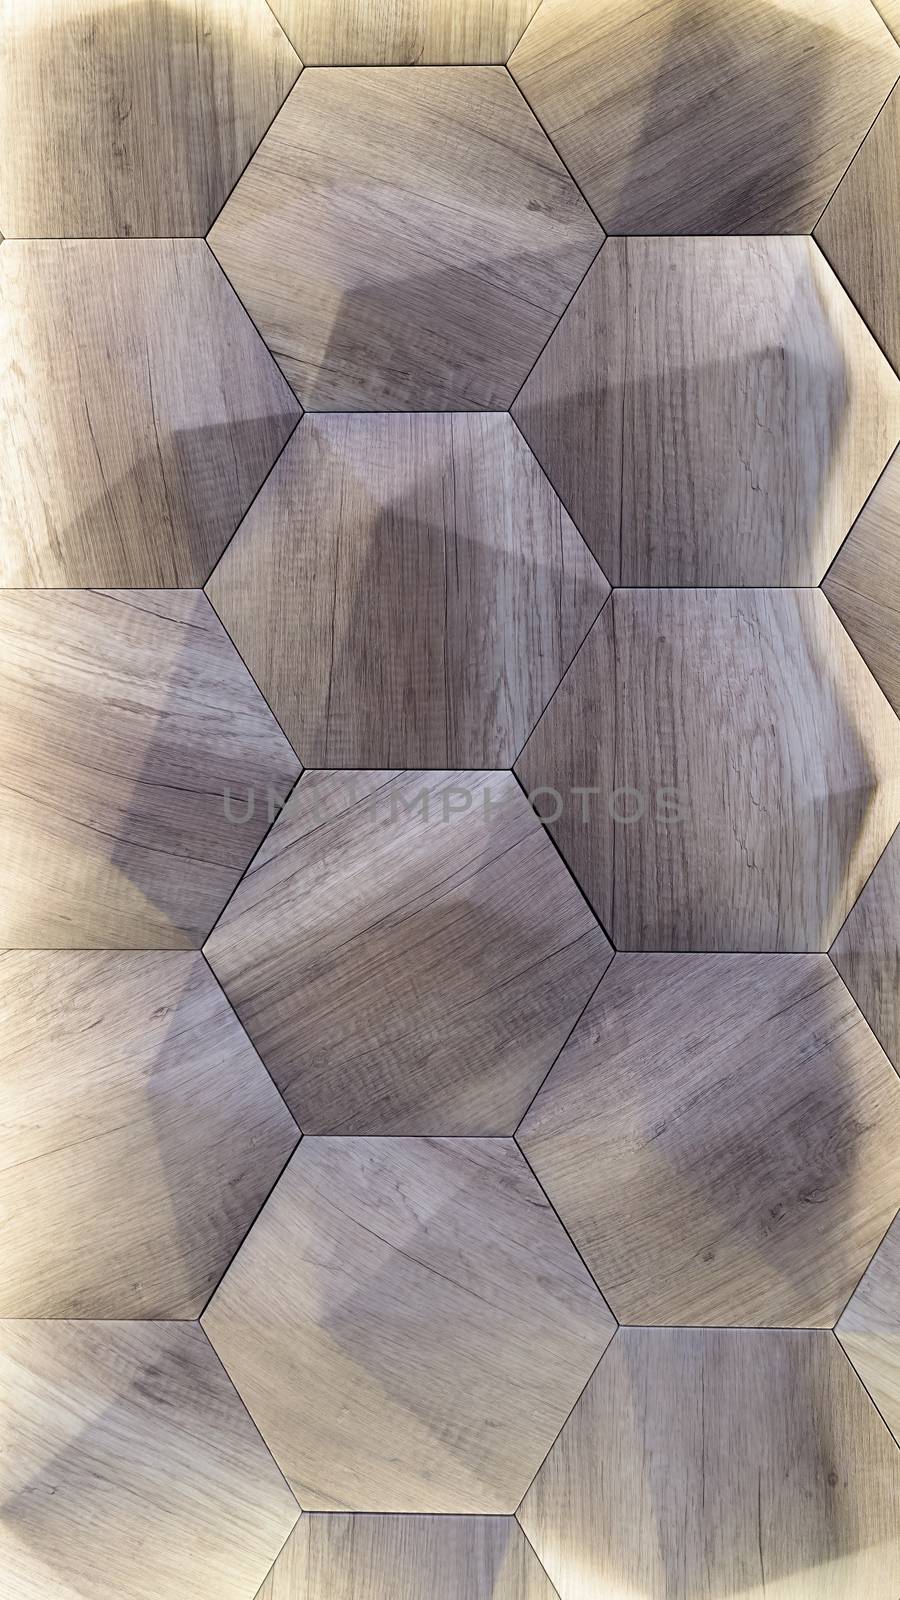 3D decorative wall with imitation wood texture for the interior of an unusual hexagonal geometric shape similar to honeycombs. Gray-brown light background with a pattern imitating a tree. Abstract texture